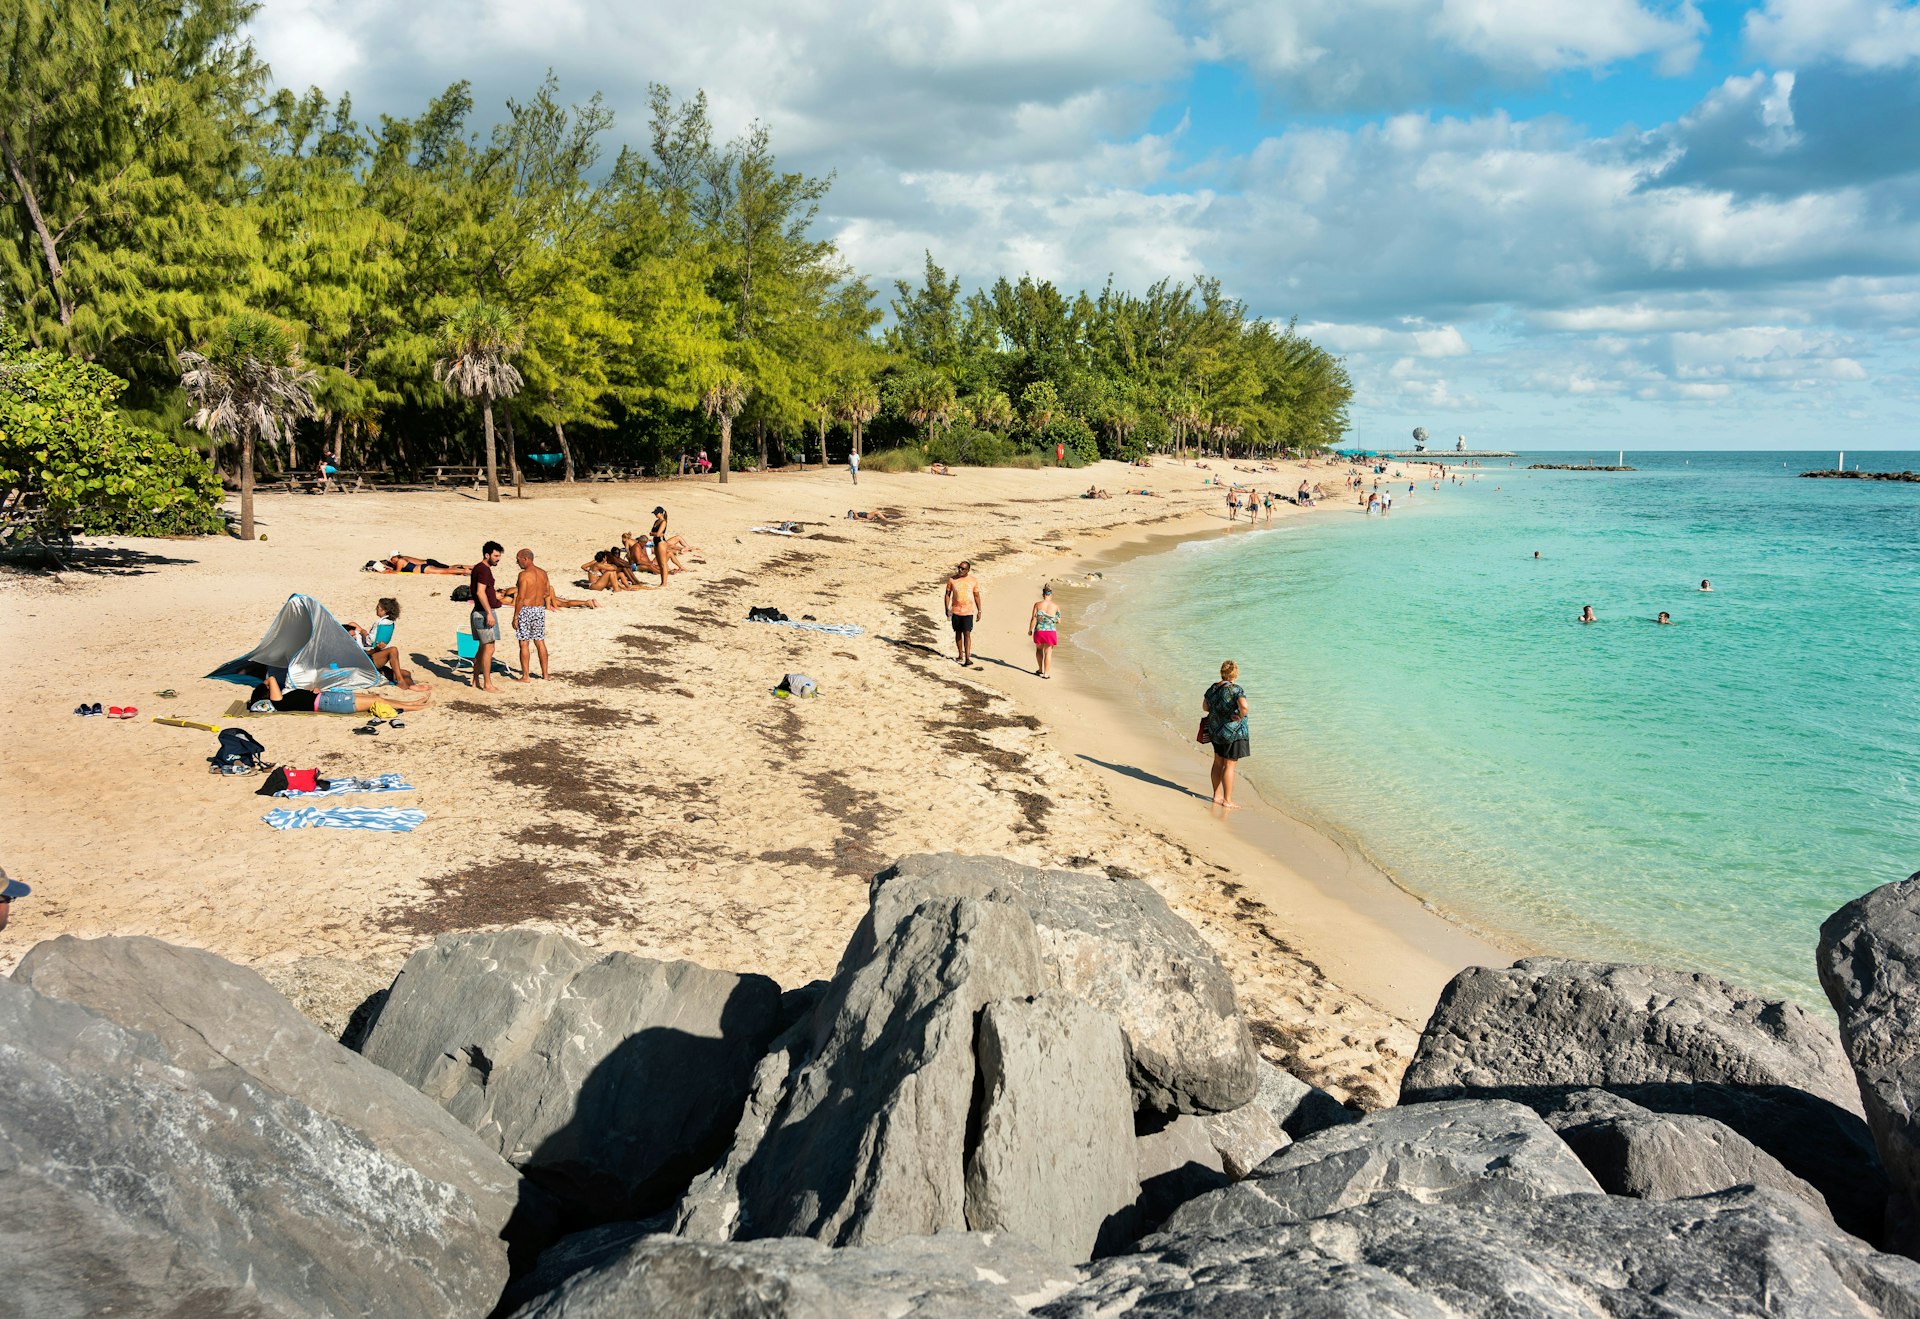 People rest on the sunny beach of Fort Zachary Taylor State Park